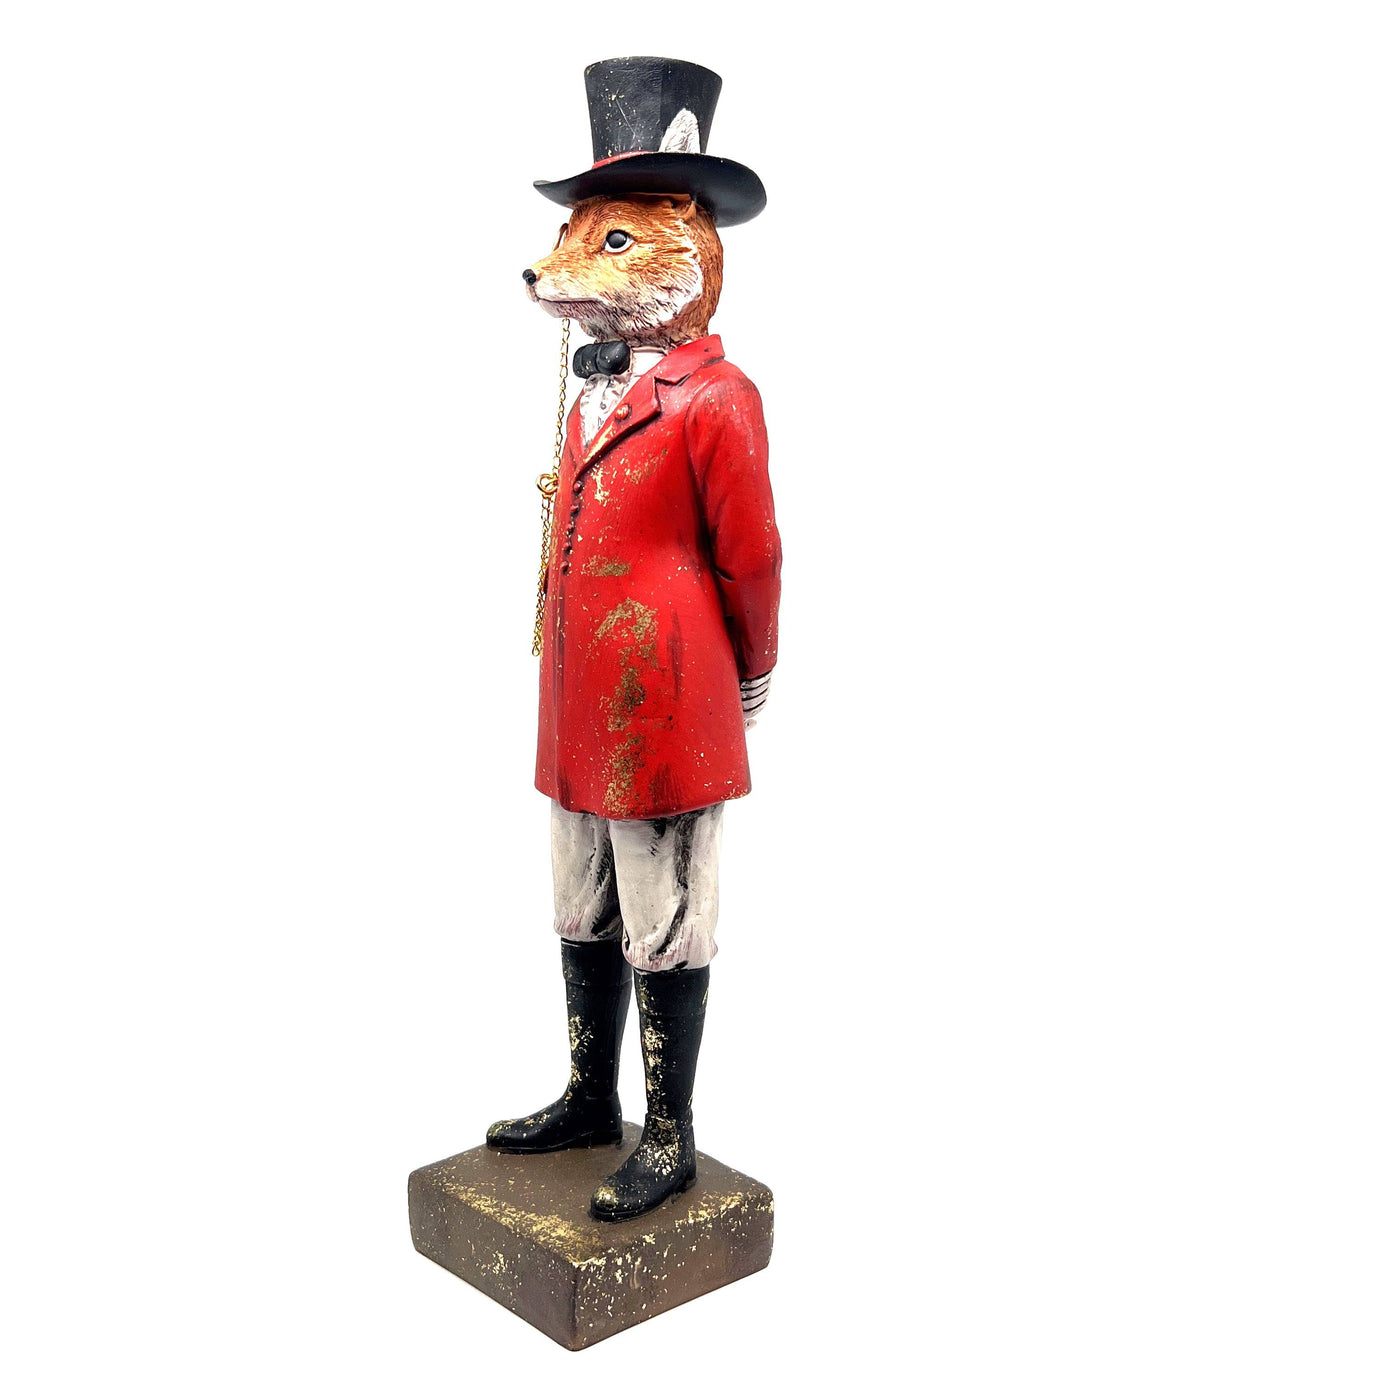 Dapper Fox with Top Hat and Monocle - Ornament - TwoBeeps.co.uk